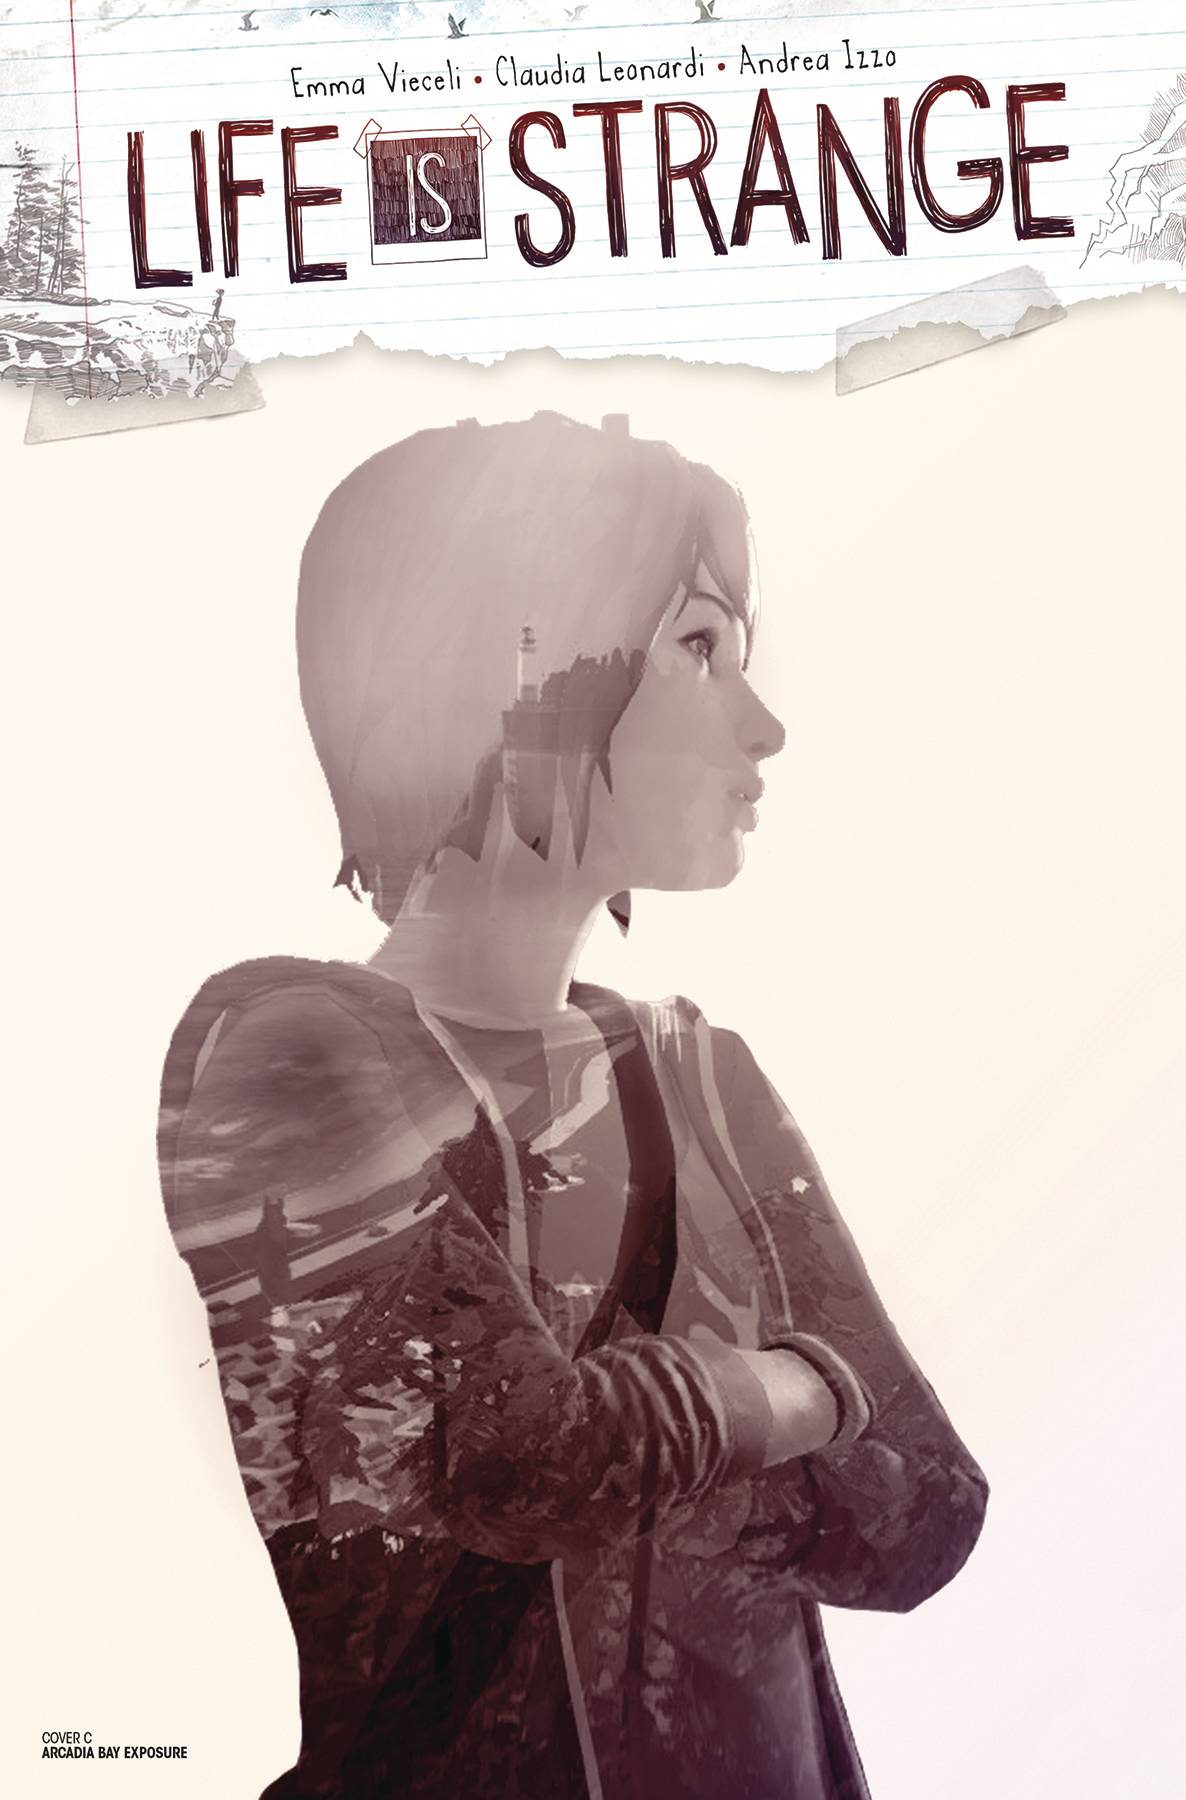 Life is Strange: Art and Game